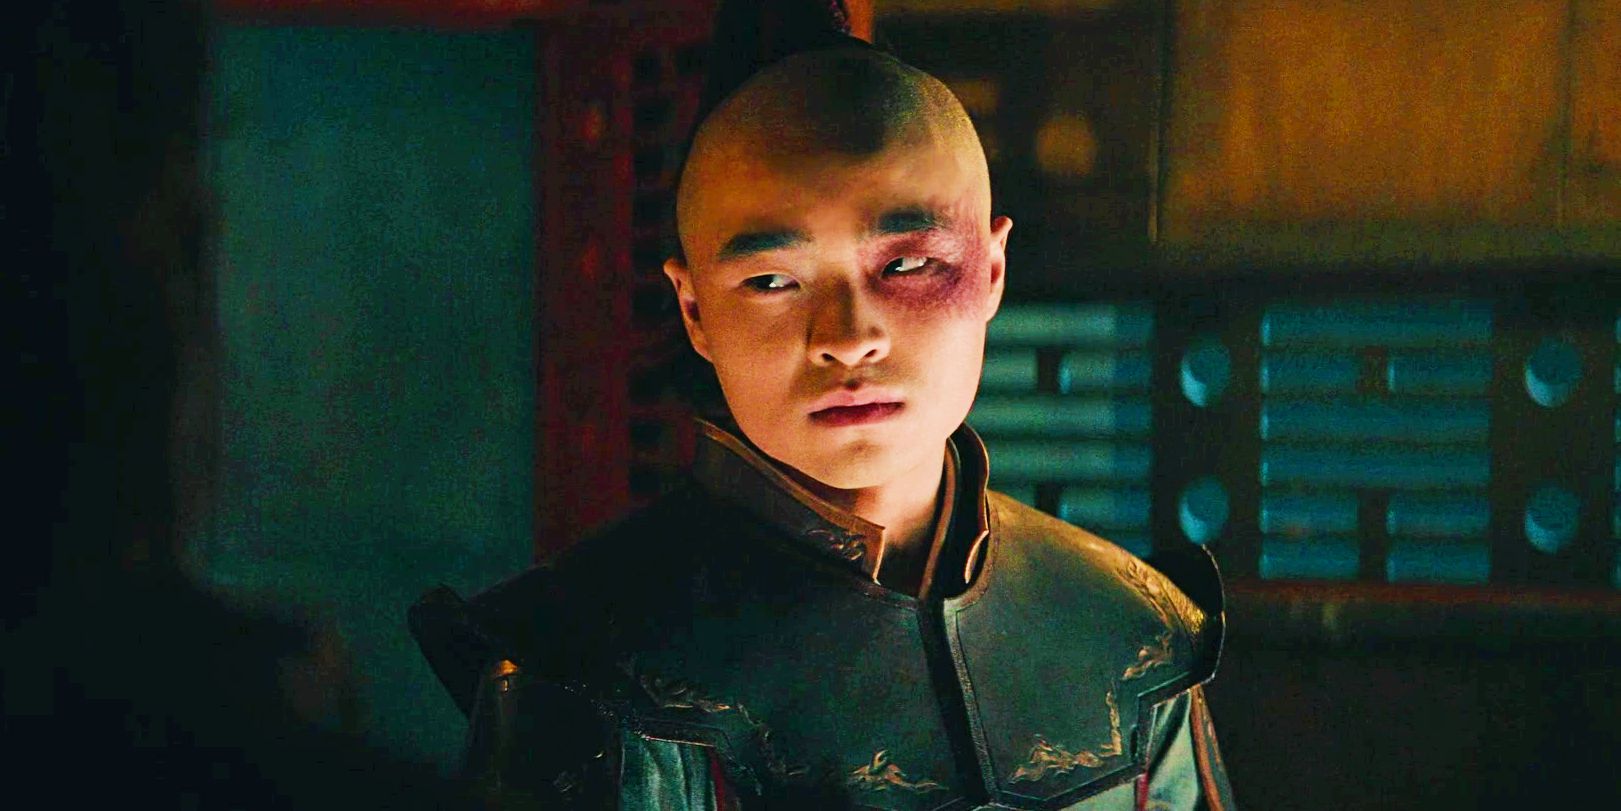 Avatar: The Last Airbender Actor Expresses Interest In Joining Another Live-Action Netflix Adaptation